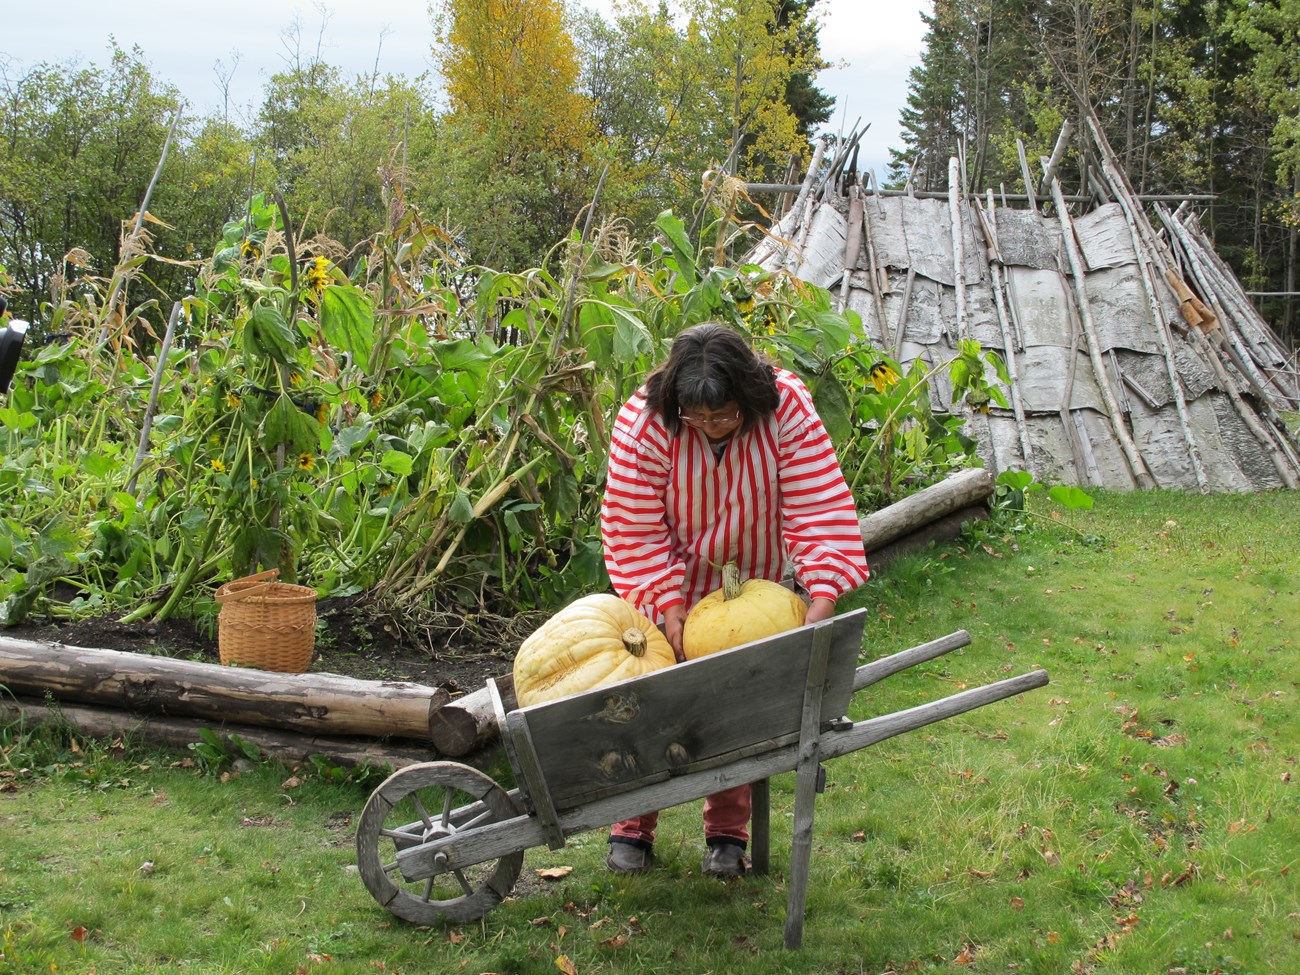 Gardener with two large squashes in a wooden wheelbarrow in front of a vegetable garden.